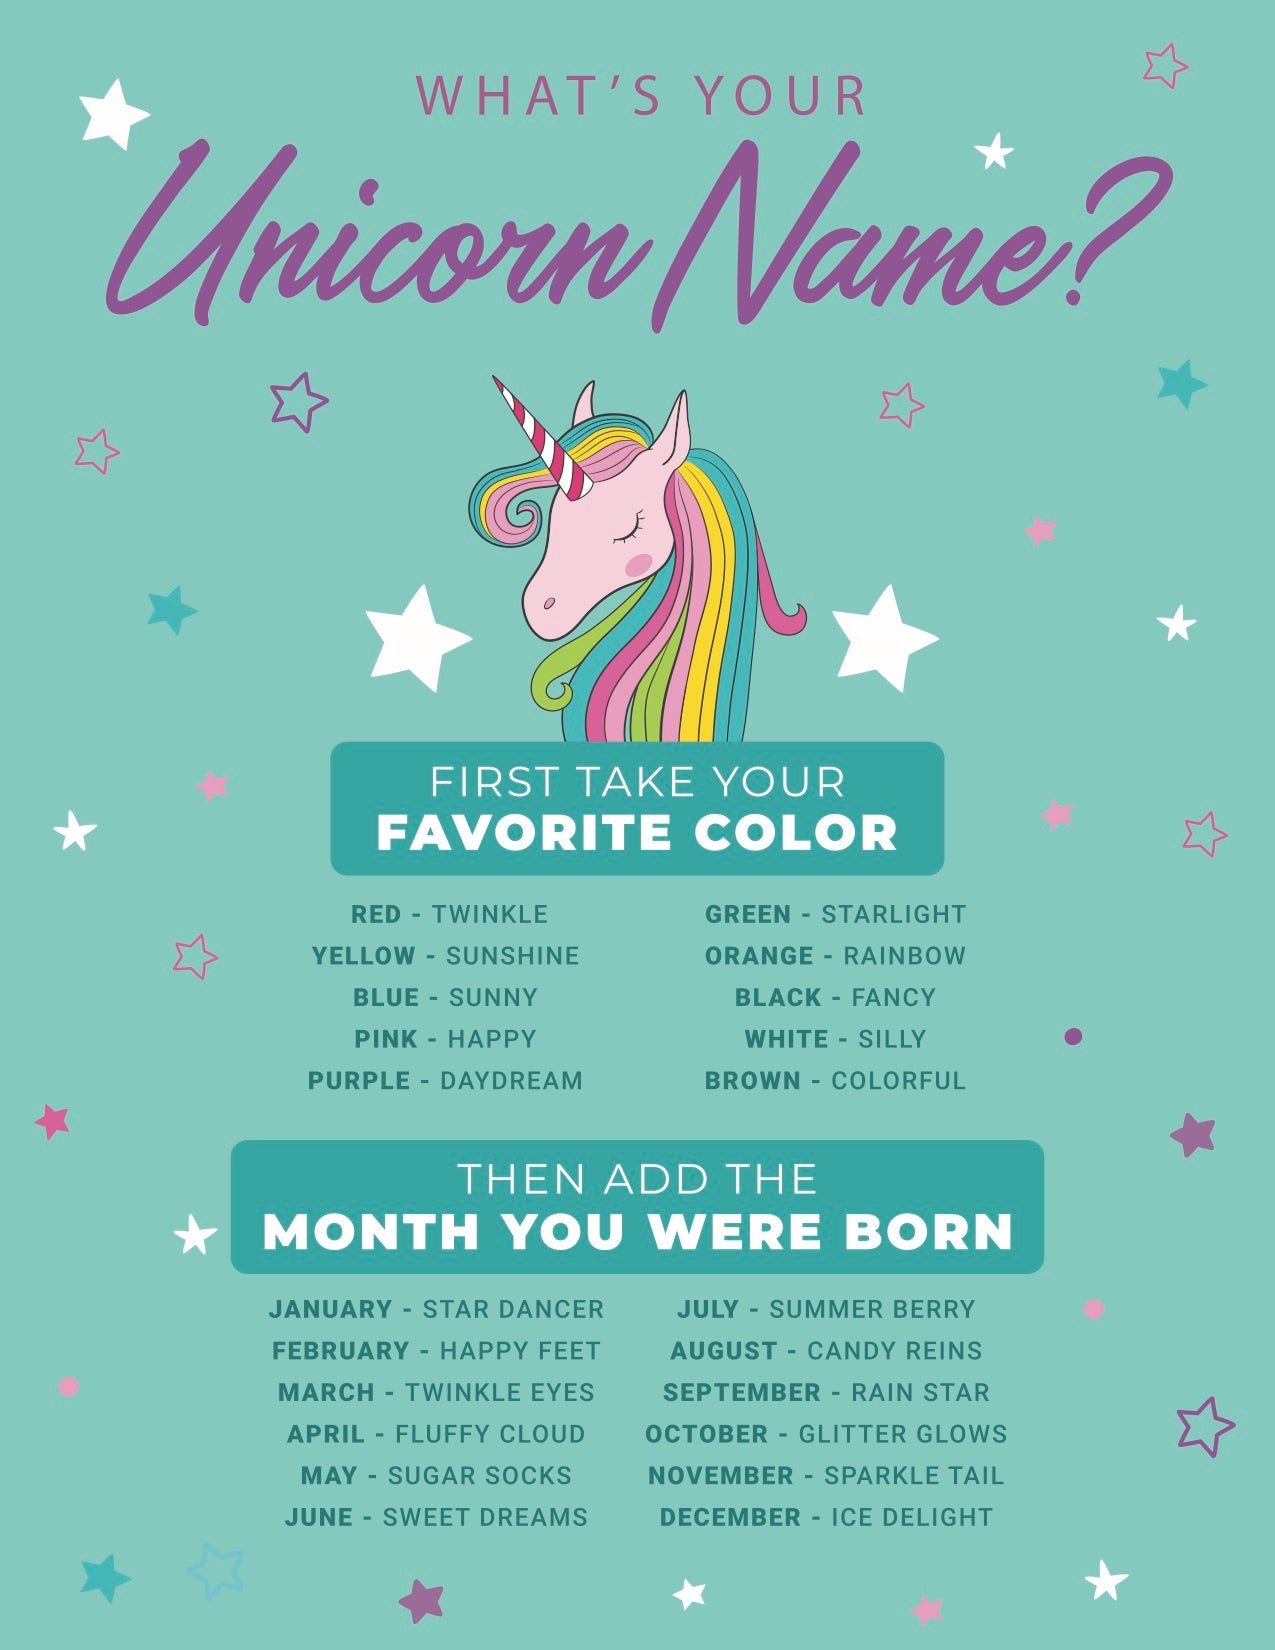 unicorn-names-free-unicorn-names-for-your-unicorn-party-what-is-your